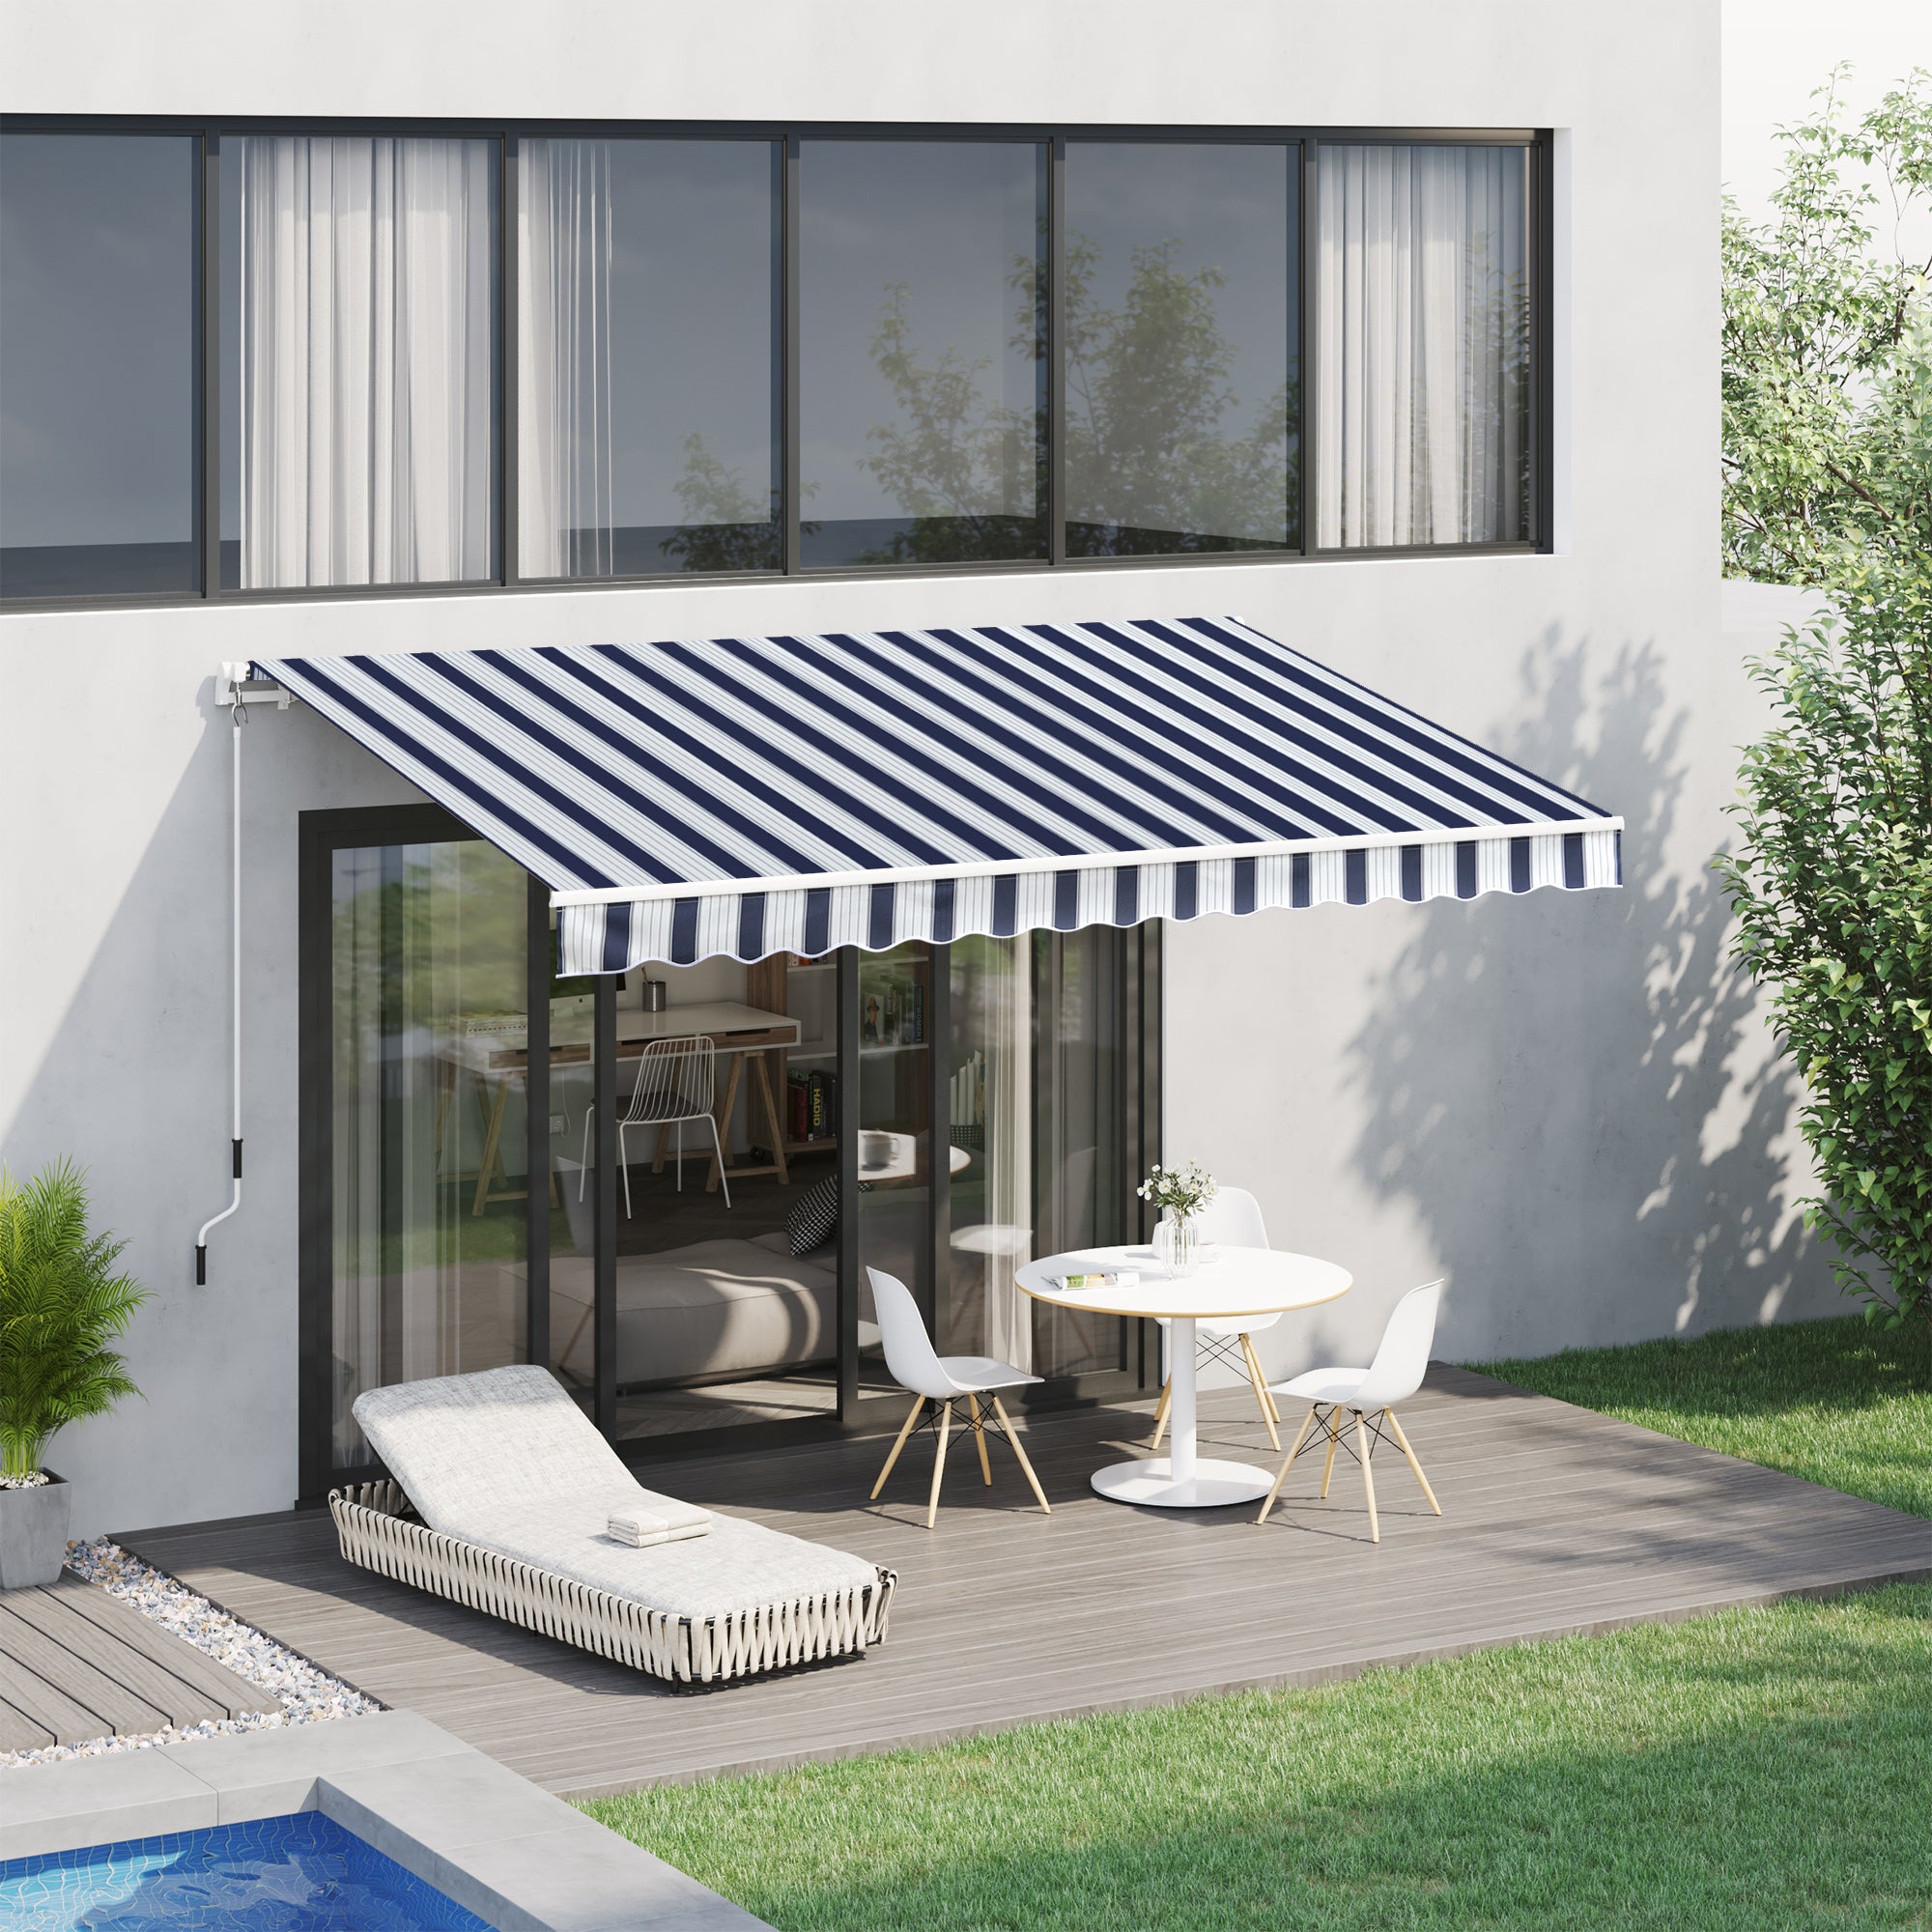 Outsunny Garden Patio Manual Awning Canopy Sun Shade Shelter Retractabl Retractable Awning, 3.5x2.5 m-Blue/White - Inspirely